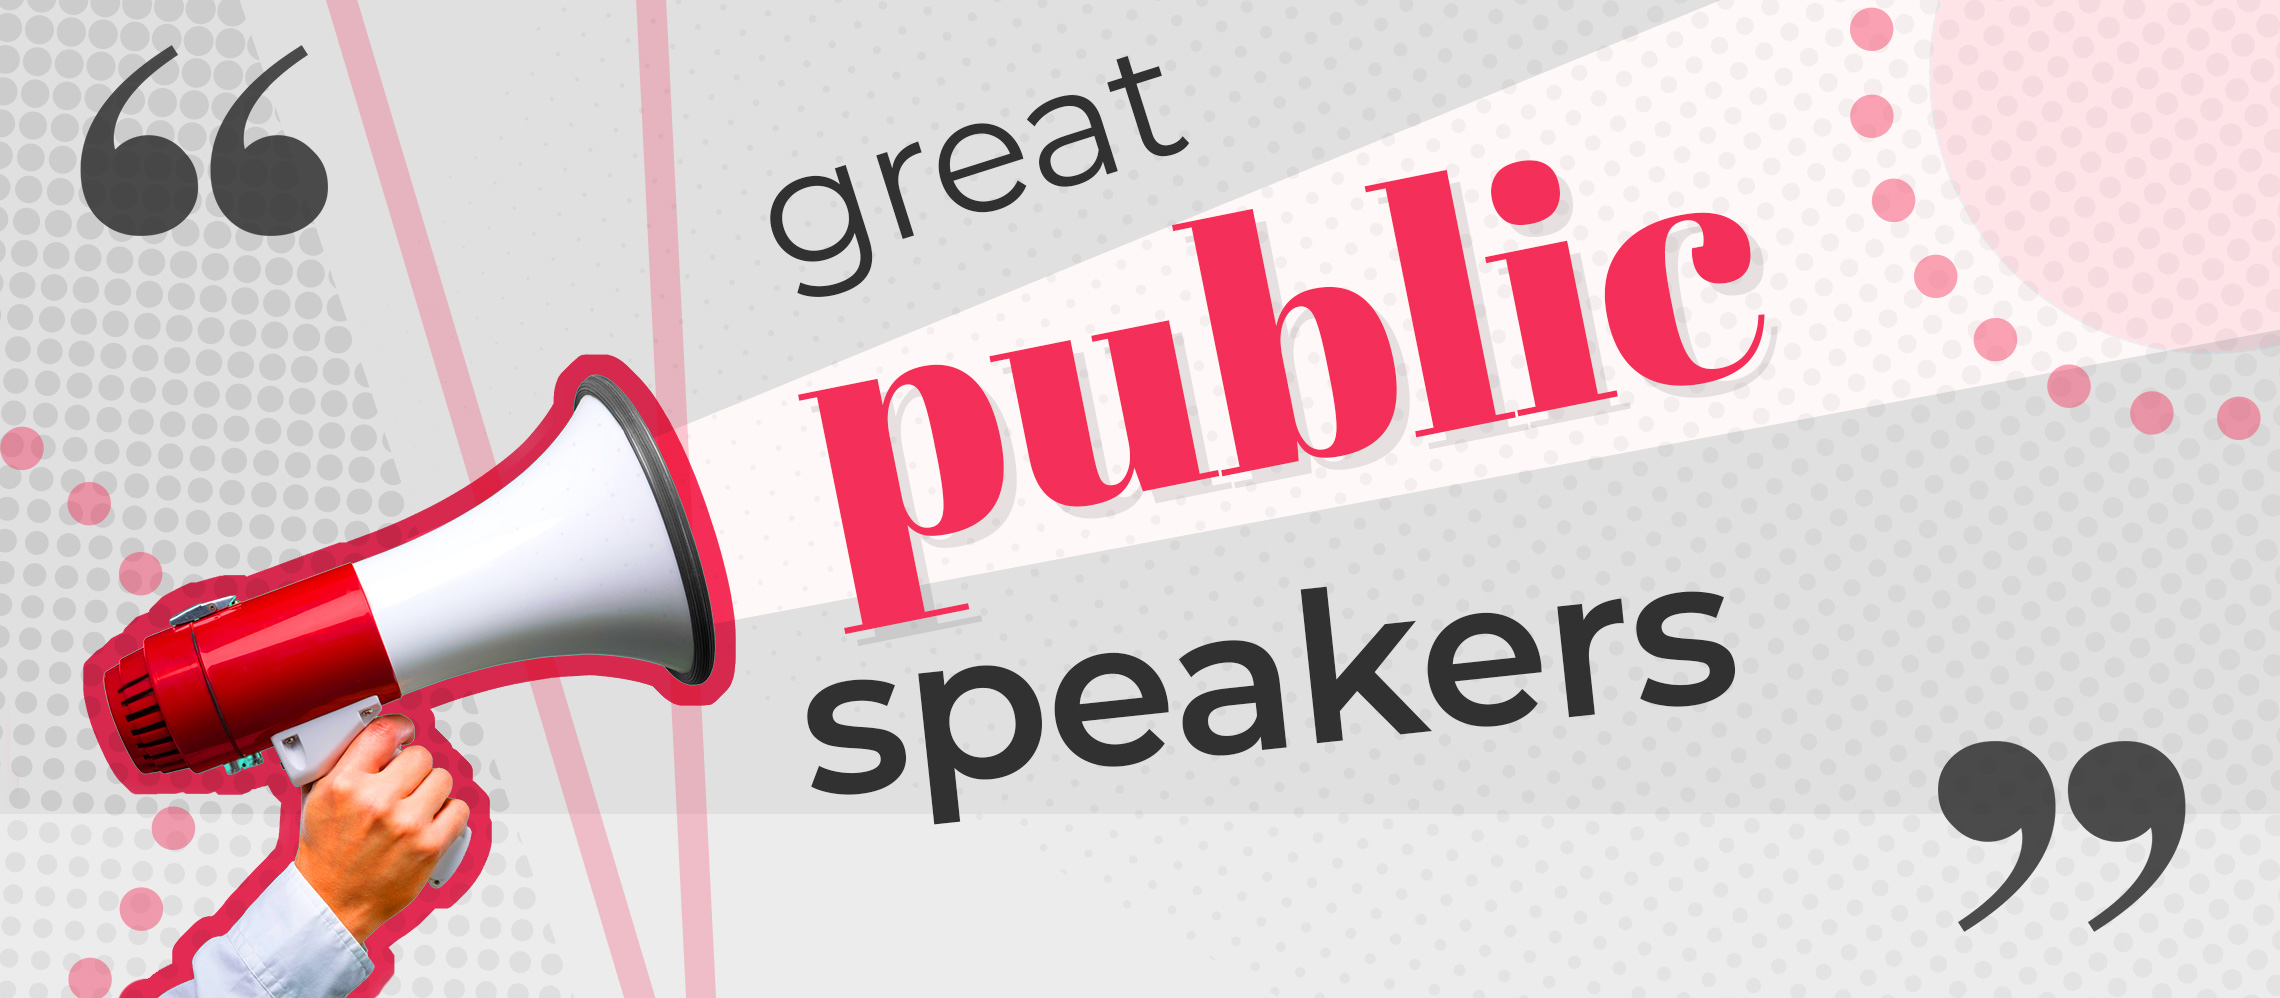 how can i be a good public speaker